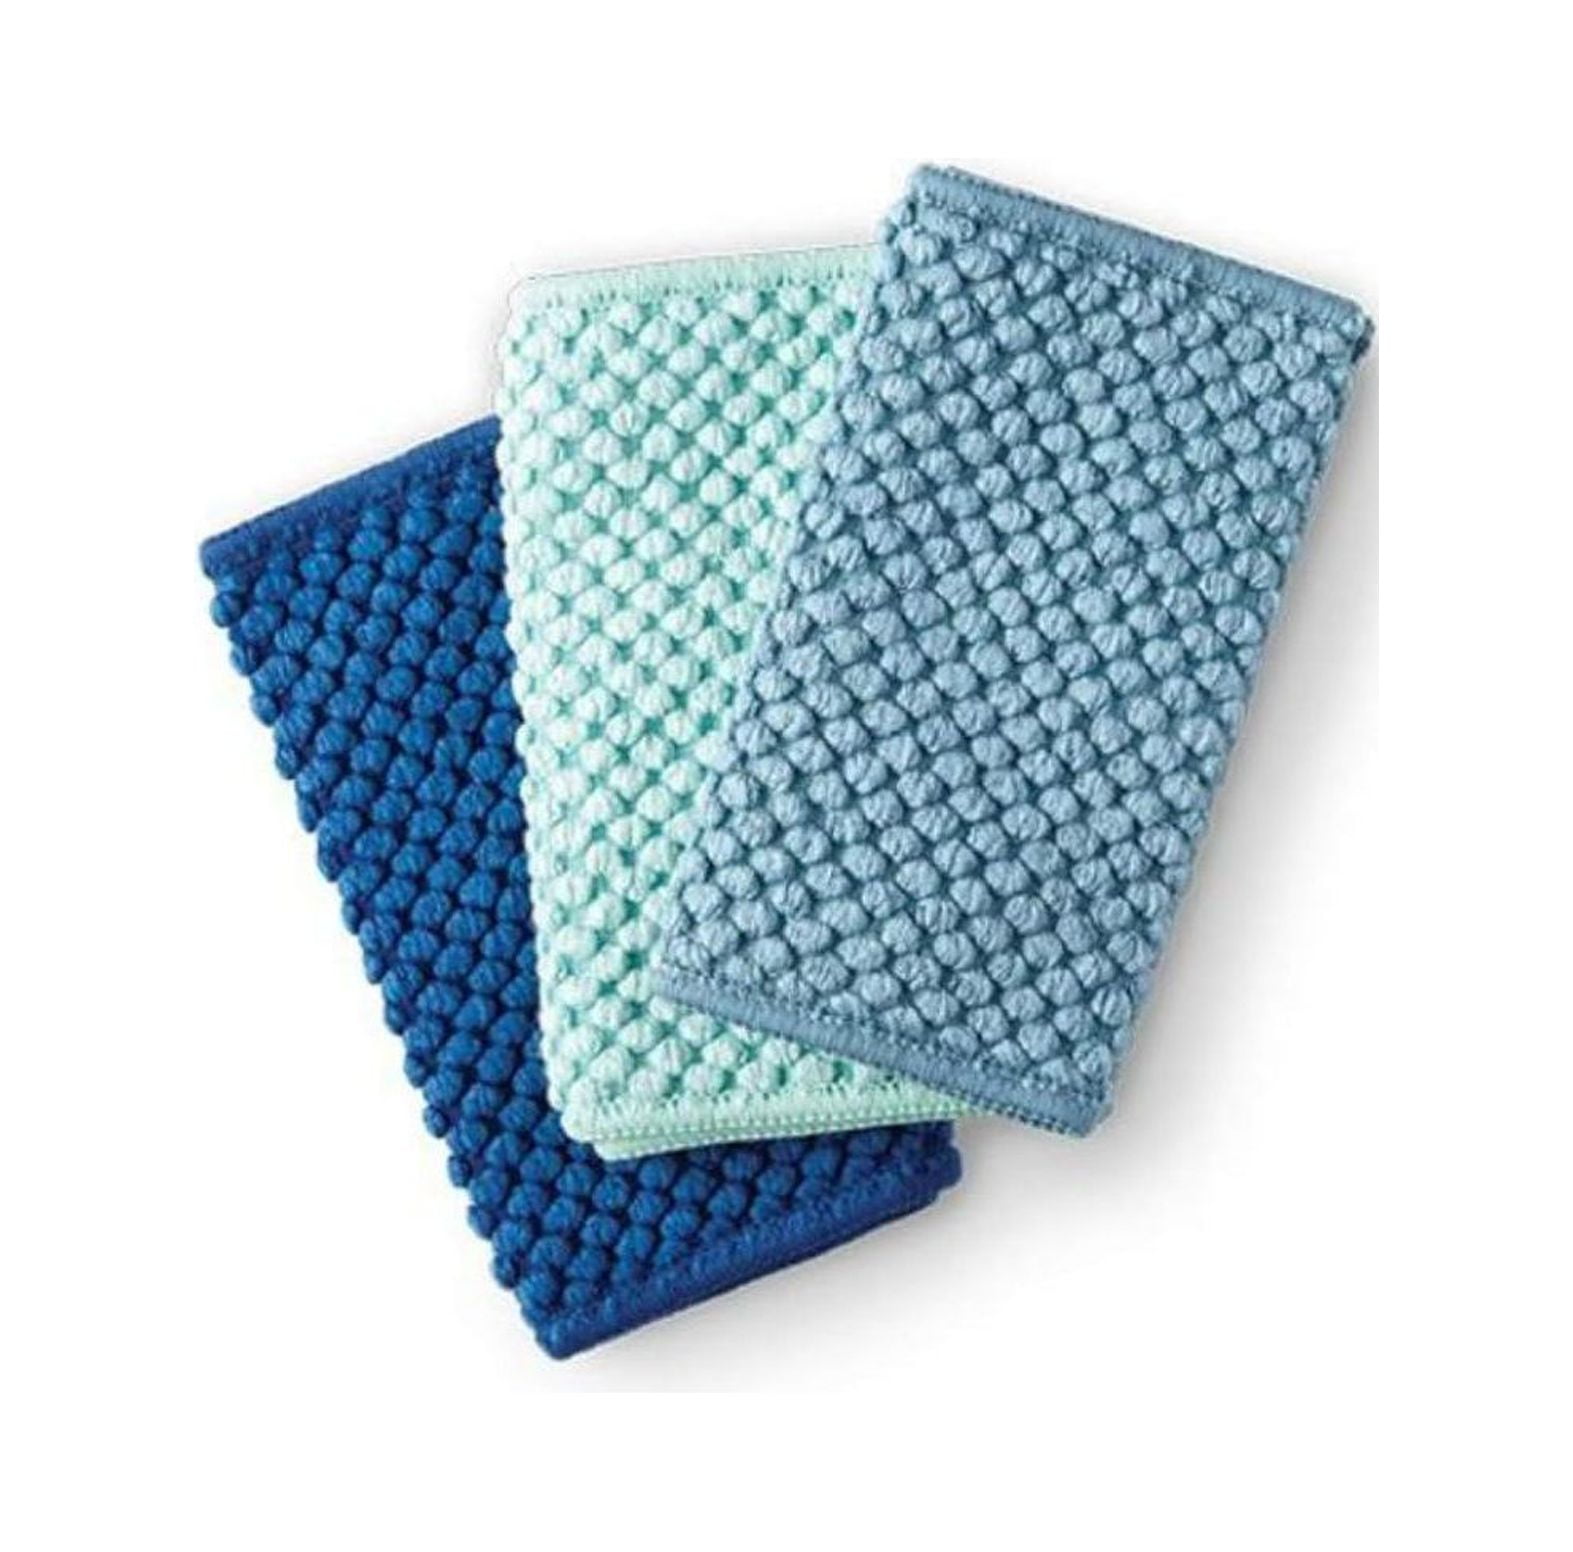 Norwex Counter Cloths (Set of 3) - Sea Mist, Navy, & Teal 